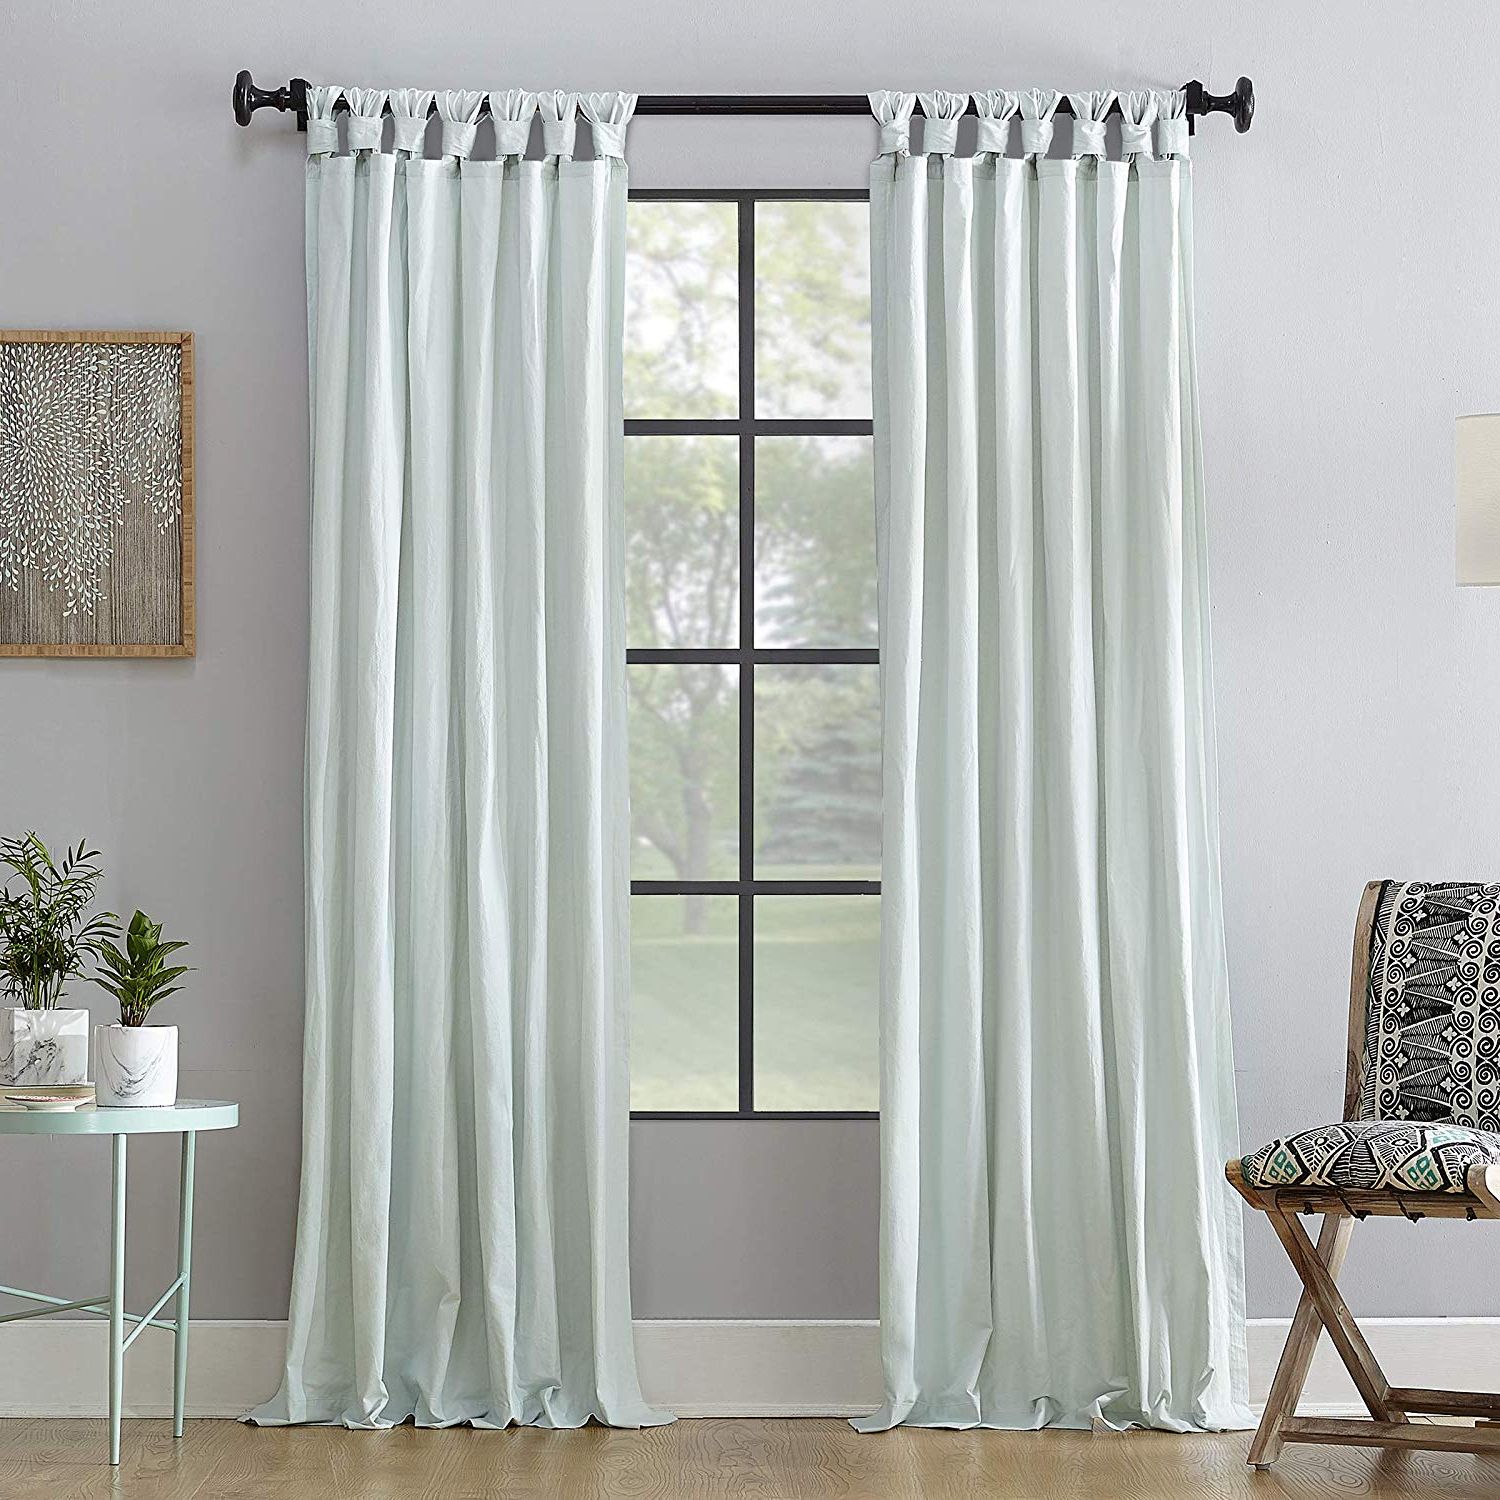 [%archaeo Washed 100% Cotton Twist Tab Curtain, 52" X 84" Panel, Seafoam Green Regarding Fashionable Archaeo Washed Cotton Twist Tab Single Curtain Panels|archaeo Washed Cotton Twist Tab Single Curtain Panels Pertaining To Recent Archaeo Washed 100% Cotton Twist Tab Curtain, 52" X 84" Panel, Seafoam Green|favorite Archaeo Washed Cotton Twist Tab Single Curtain Panels Regarding Archaeo Washed 100% Cotton Twist Tab Curtain, 52" X 84" Panel, Seafoam Green|famous Archaeo Washed 100% Cotton Twist Tab Curtain, 52" X 84" Panel, Seafoam Green Intended For Archaeo Washed Cotton Twist Tab Single Curtain Panels%] (View 1 of 20)